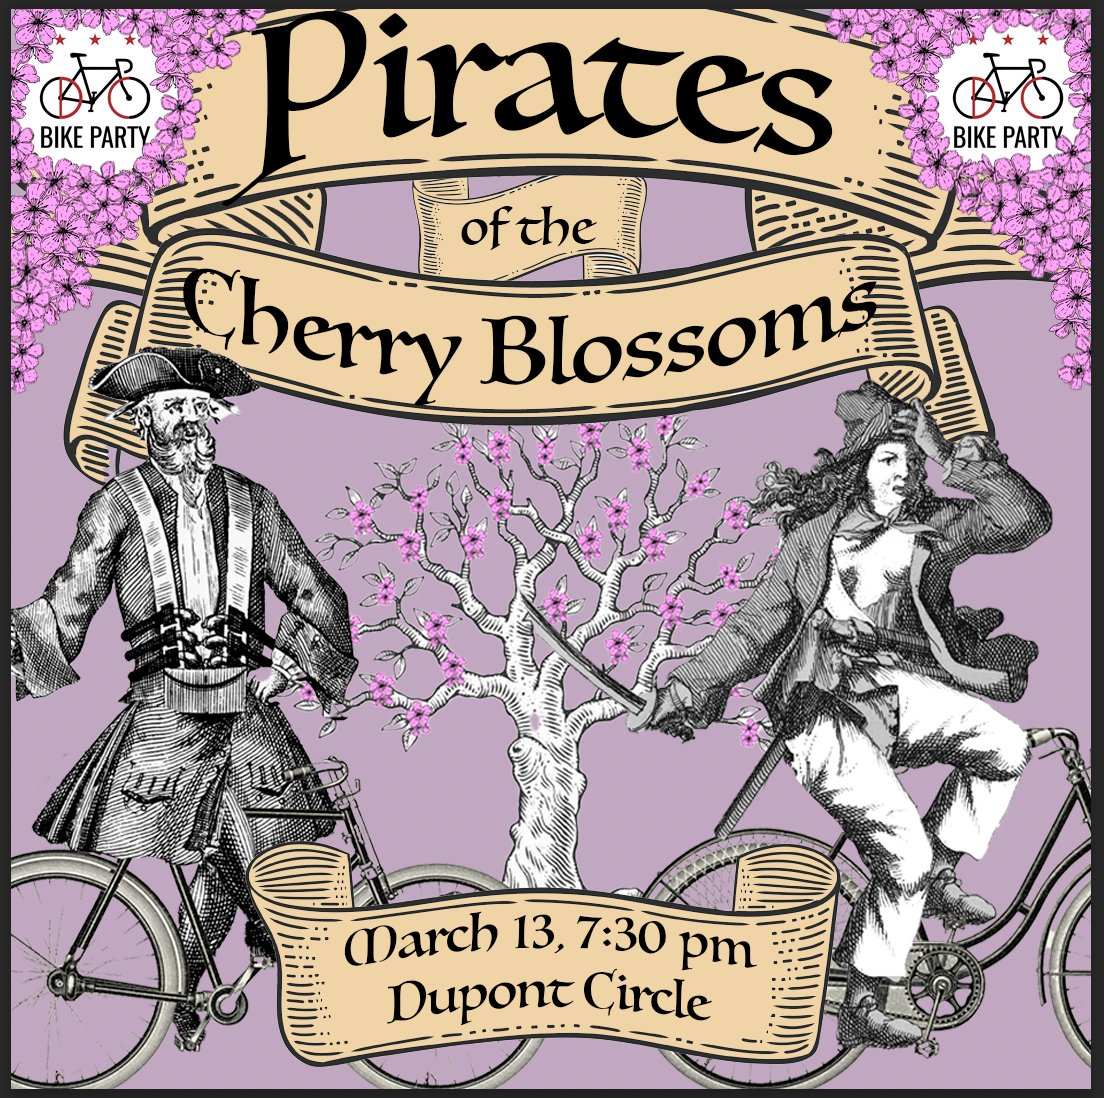 Ahoy Mateys! DCBikeParty’s band of privateers set sail on the seas of DC Wed 3/13 meet Dupont Circle 730, wheels up @ 8 To seek out the fabled treasured Cherry Blossom blooms! Bring your hearties and come dressed in your pirate’s best! Heave ho! More: facebook.com/events/s/dc-bi…